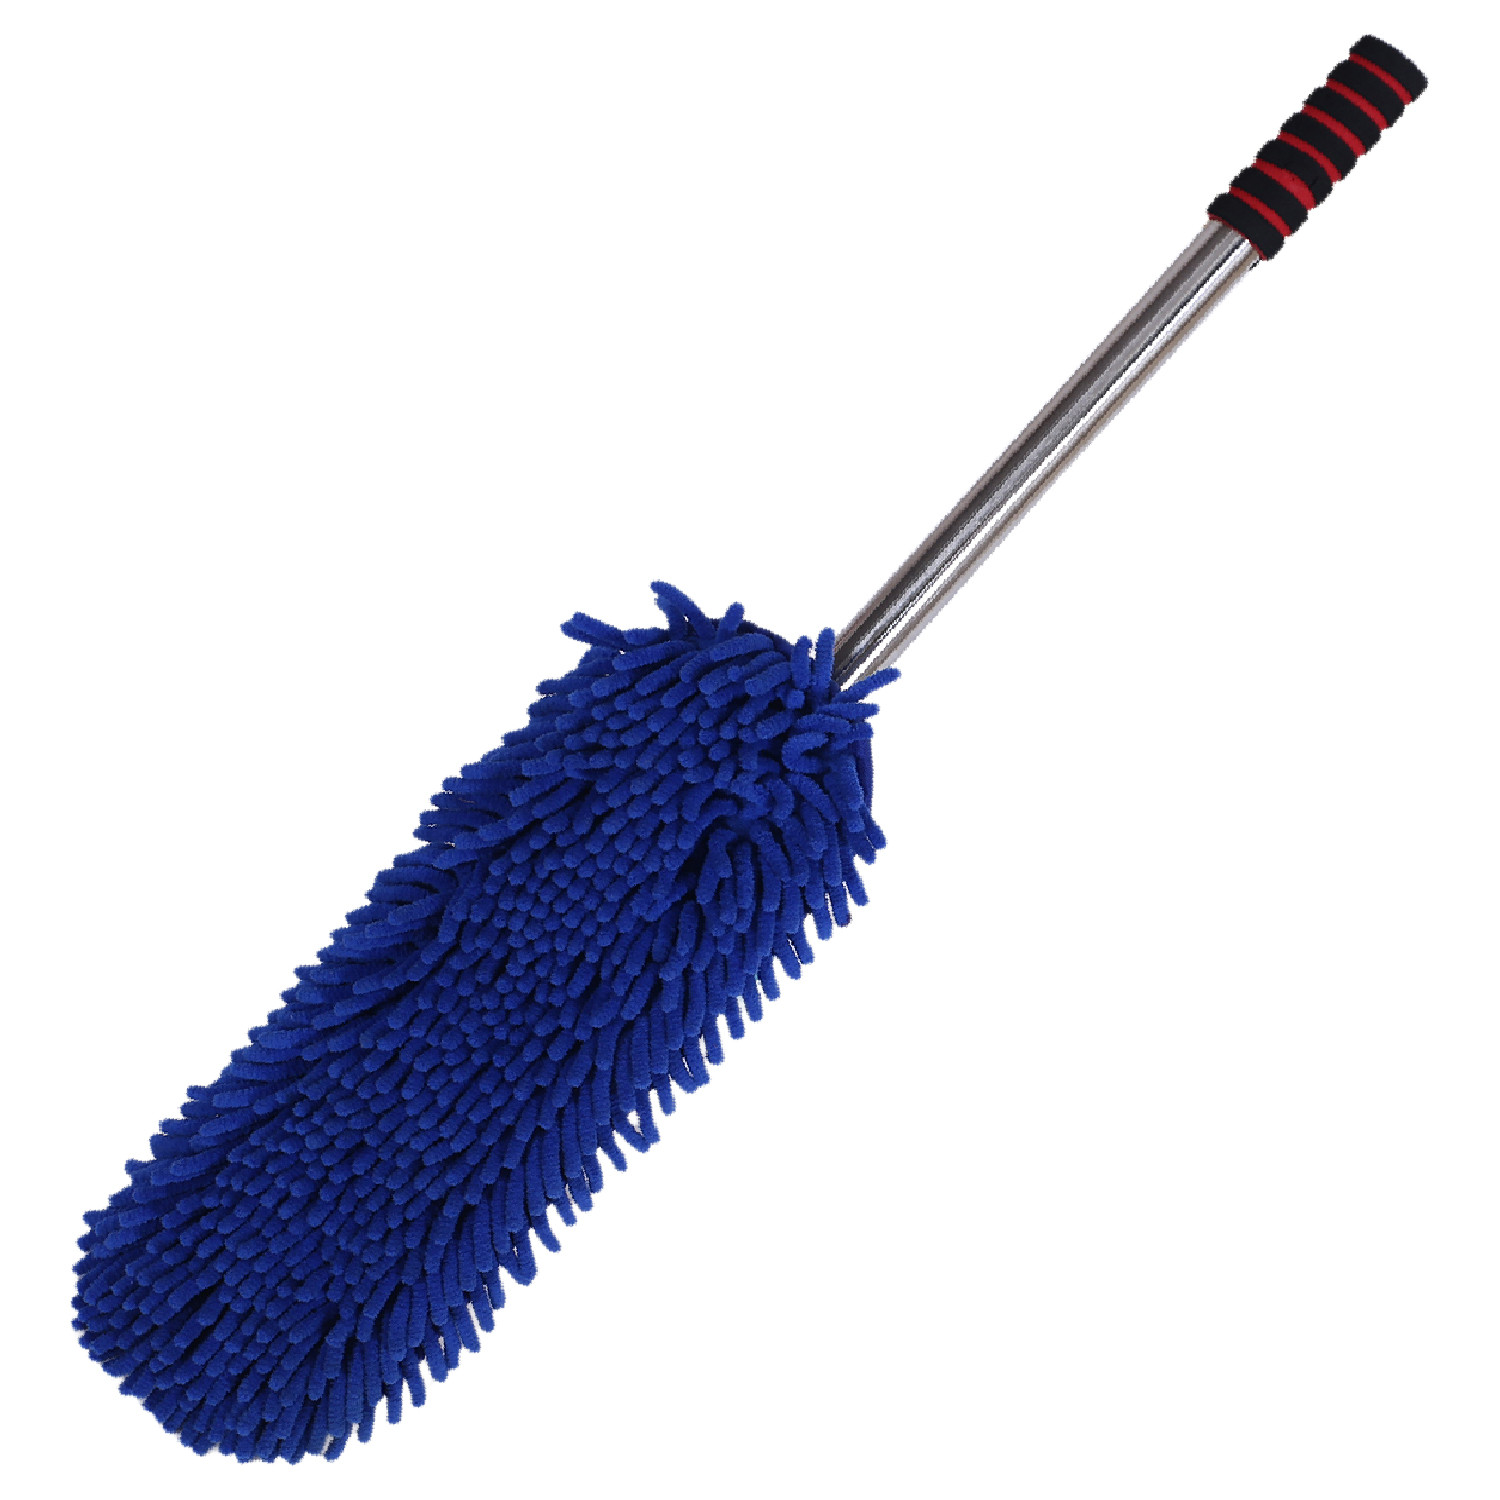 Kuber Industries Microfiber Washable Hand Duster|Stainless Steel Detachable Handle with Cleaning Brush For Car, House Clean (Blue)